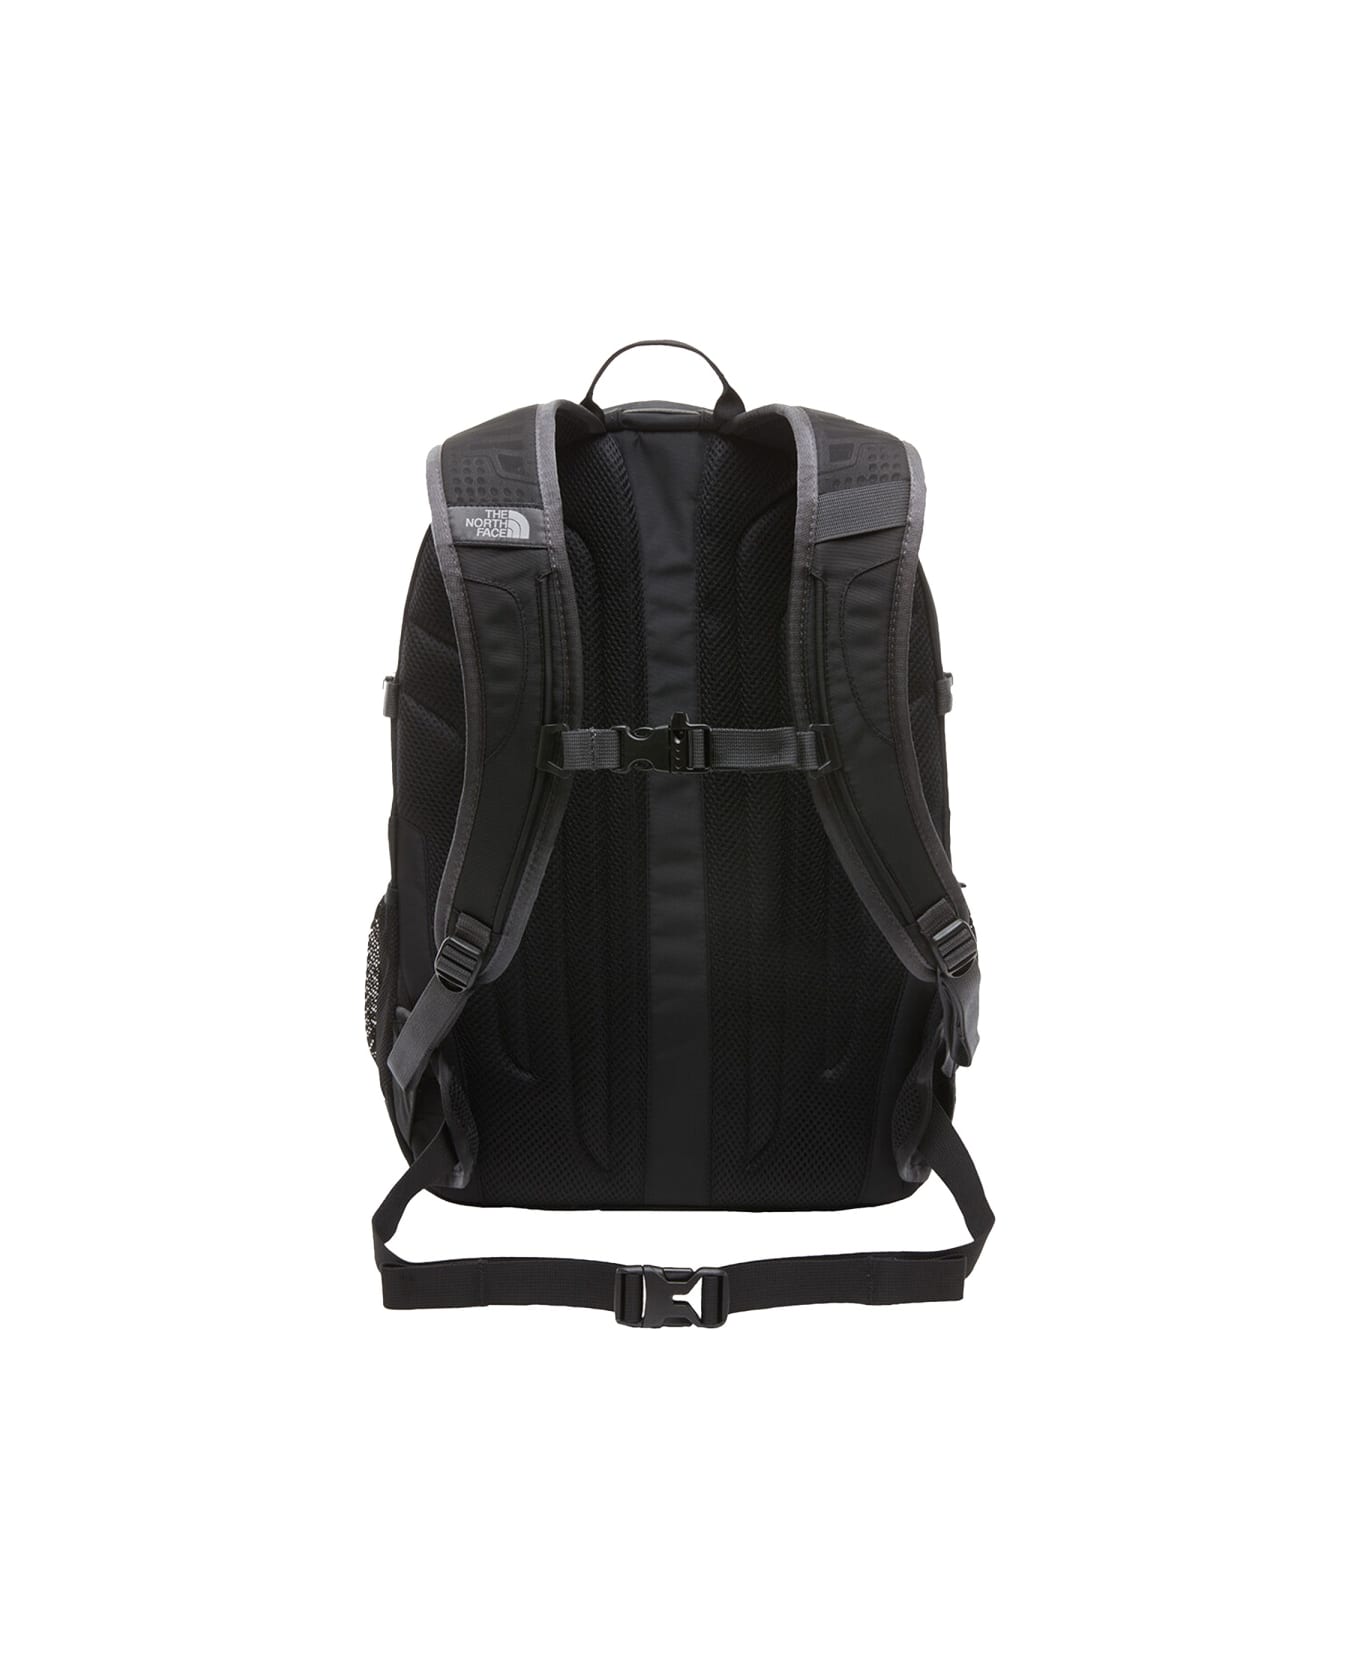 The North Face Borealis Classic Backpack - BLACK